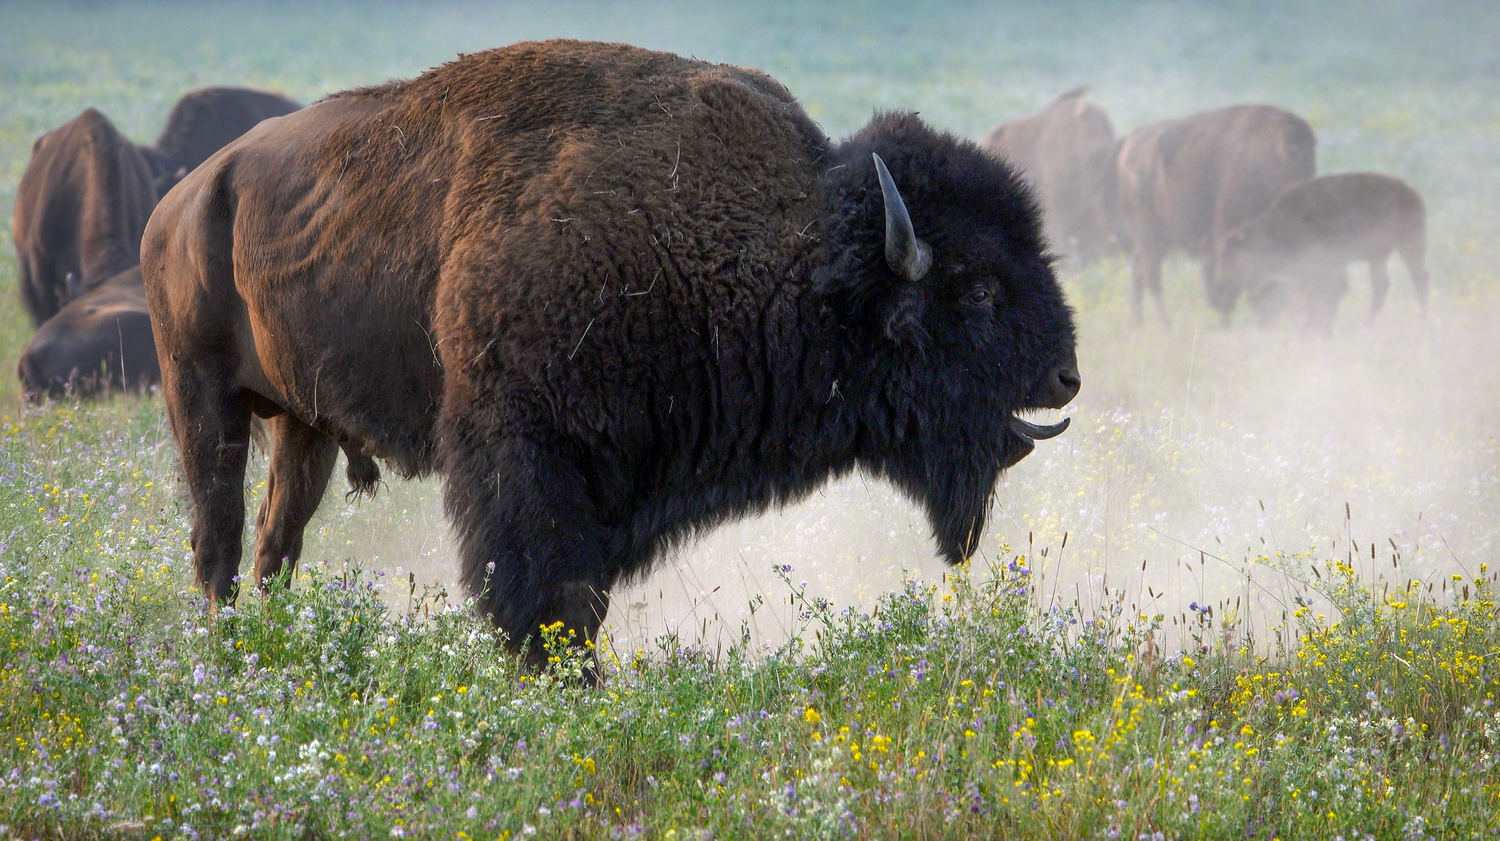 NATIVE Film Bison Documentary Limited Edition Prints